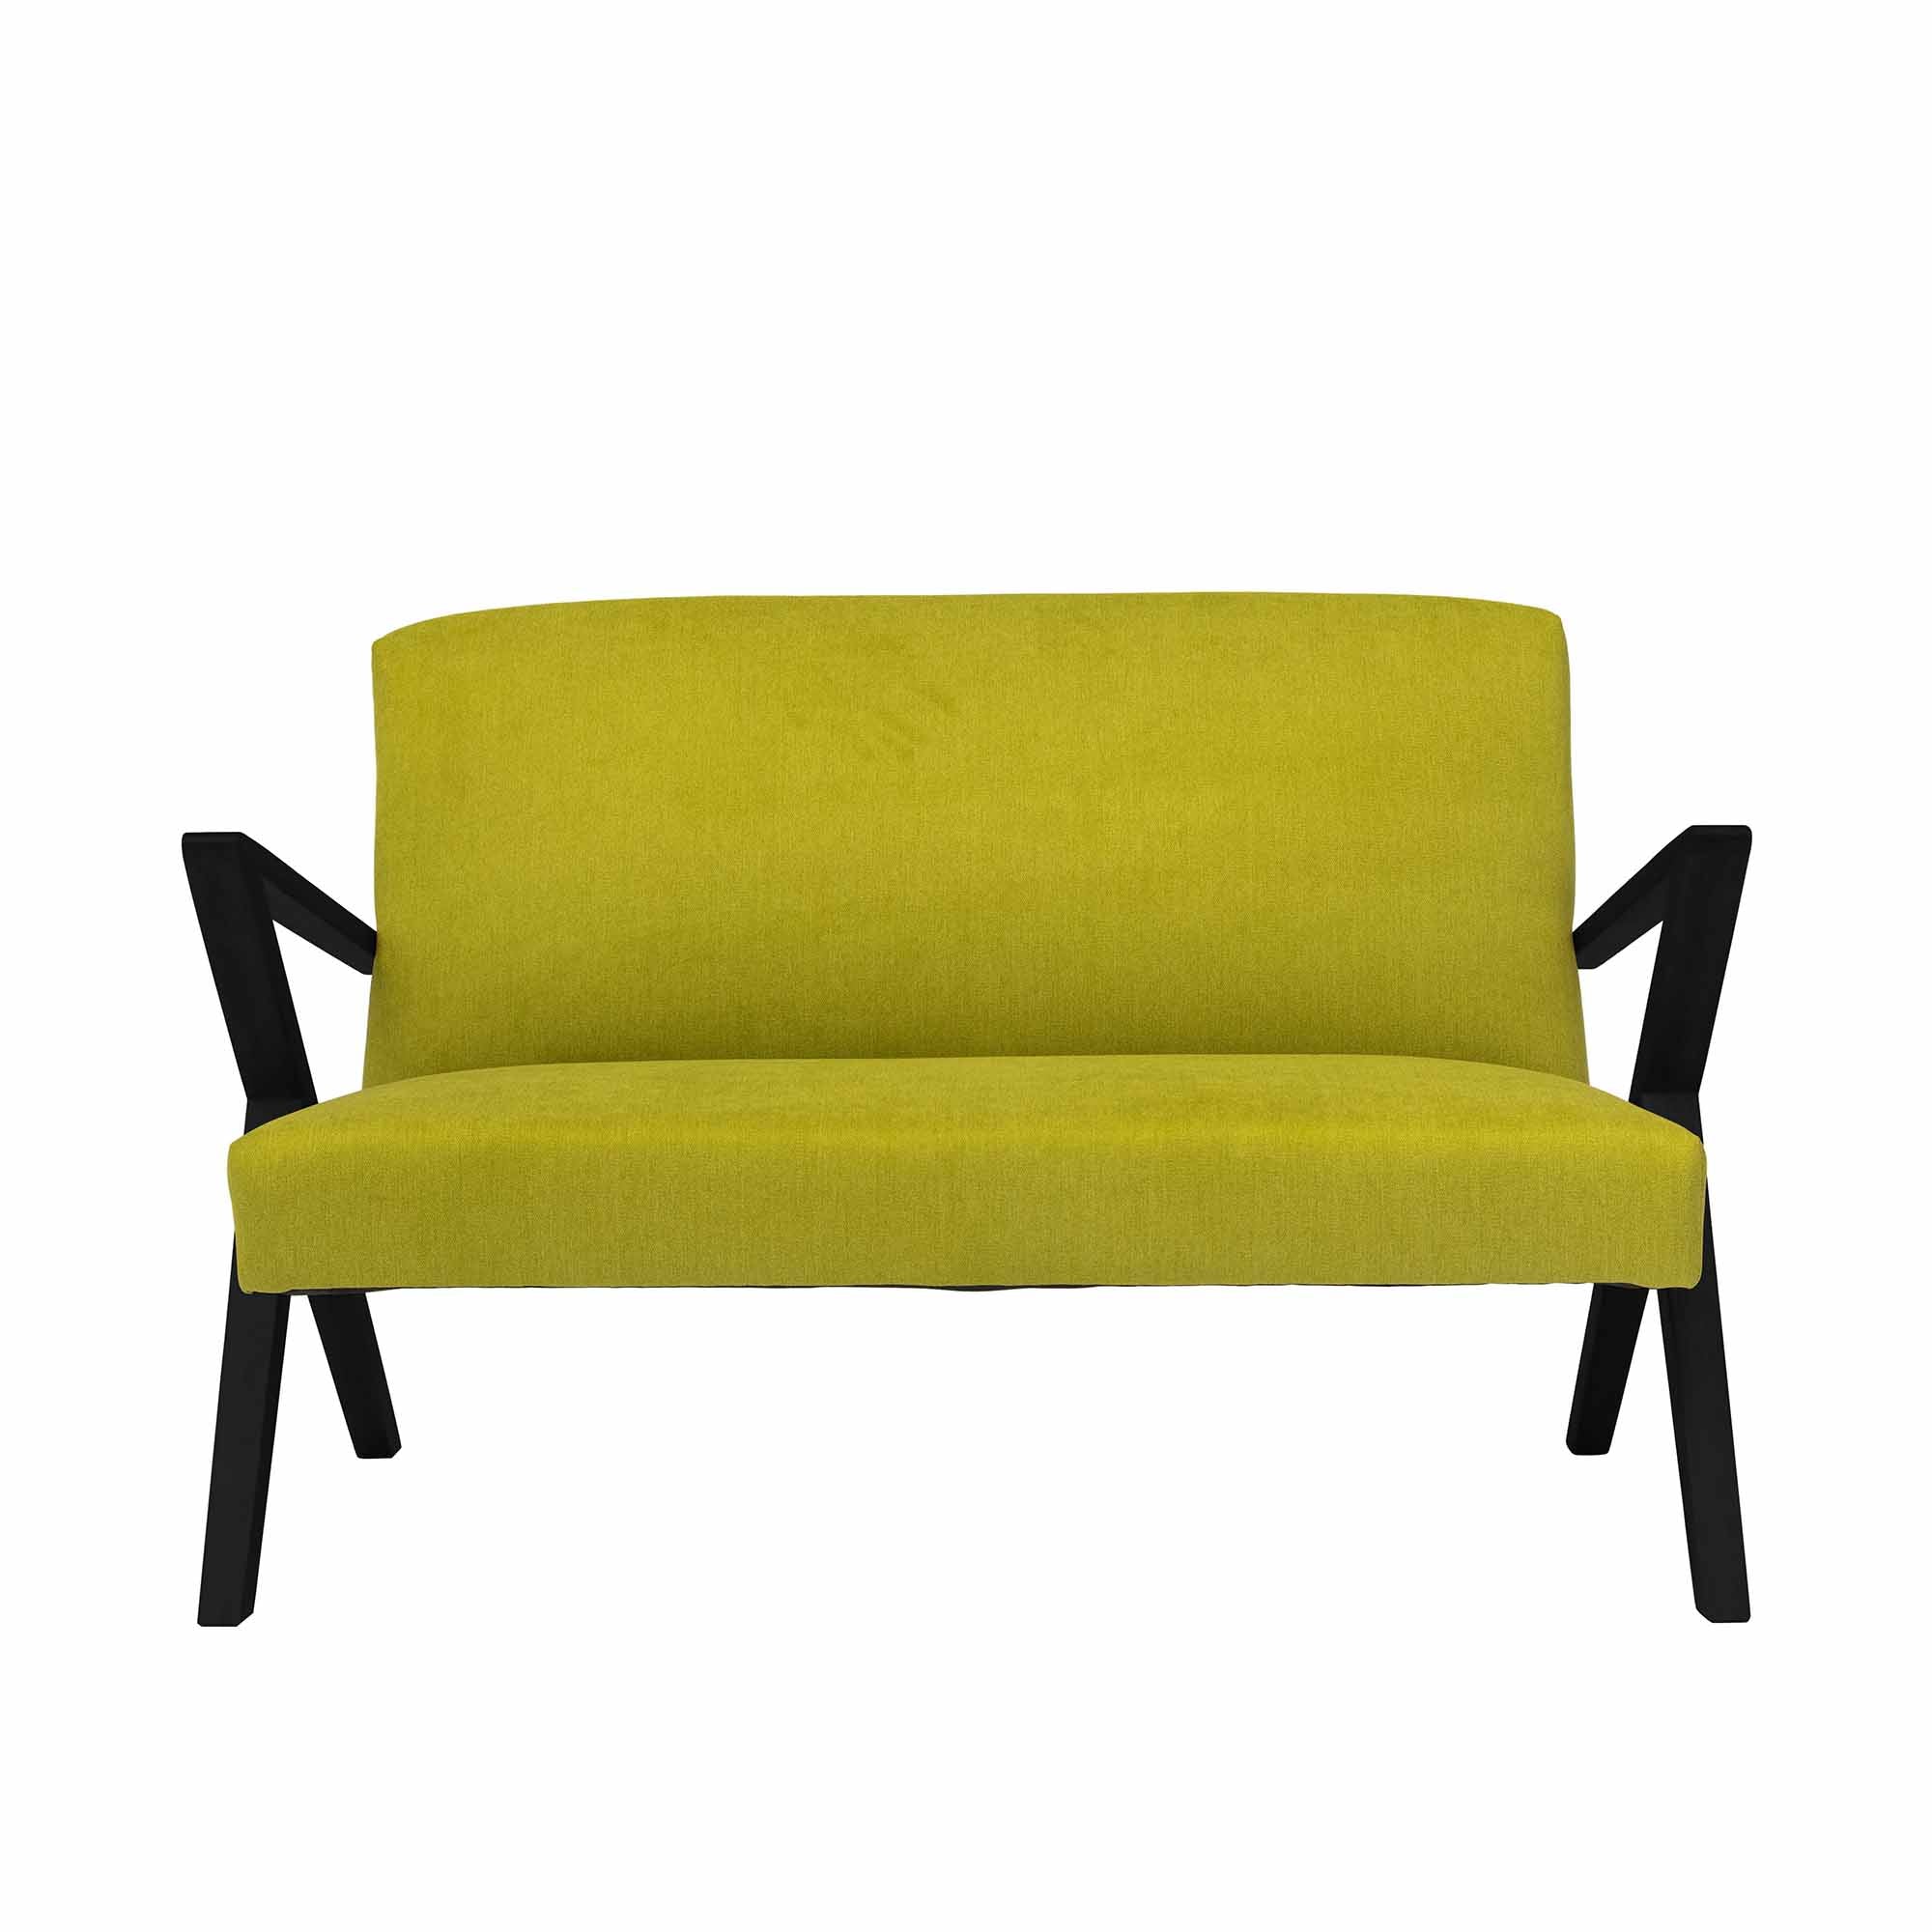 2-Seater Sofa, Beech Wood Frame, Black Lacquered green fabric, front view